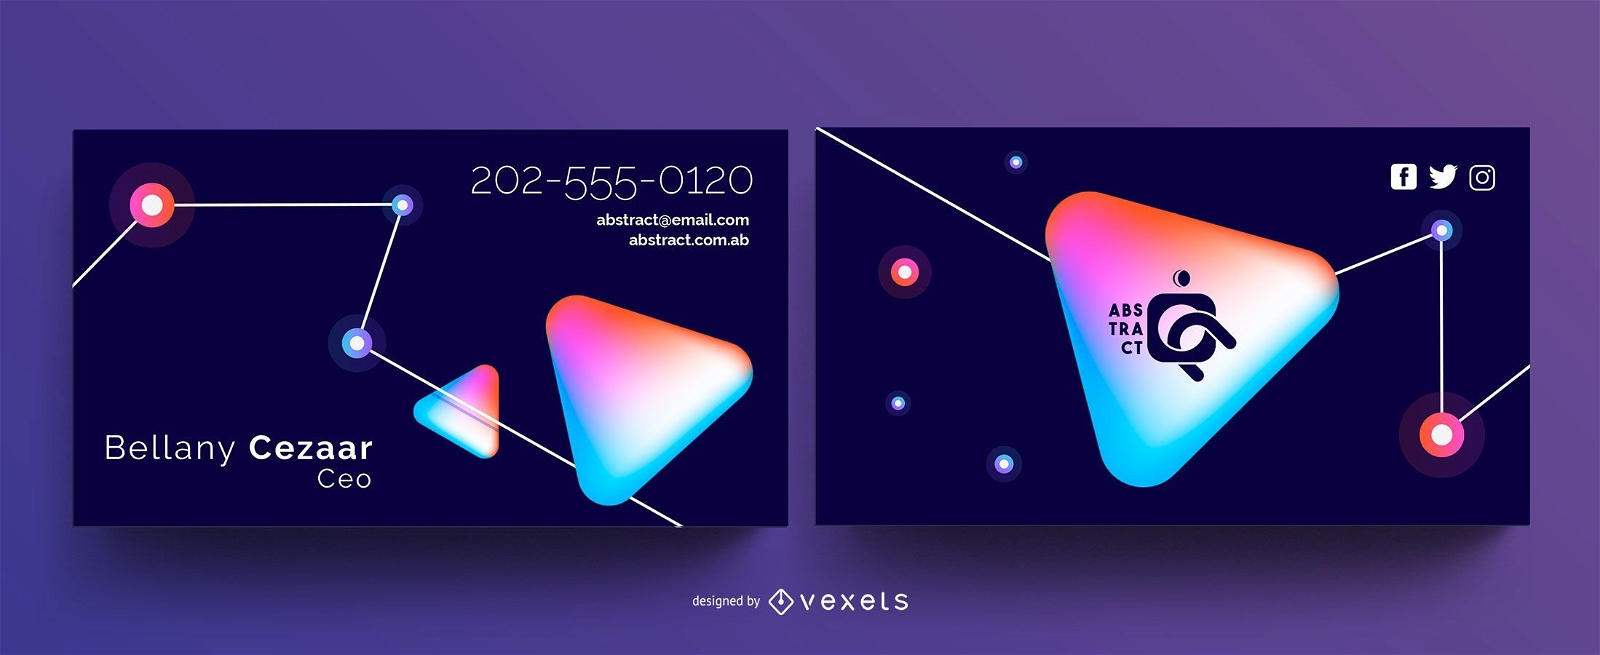 Abstract Technology Business Card Template